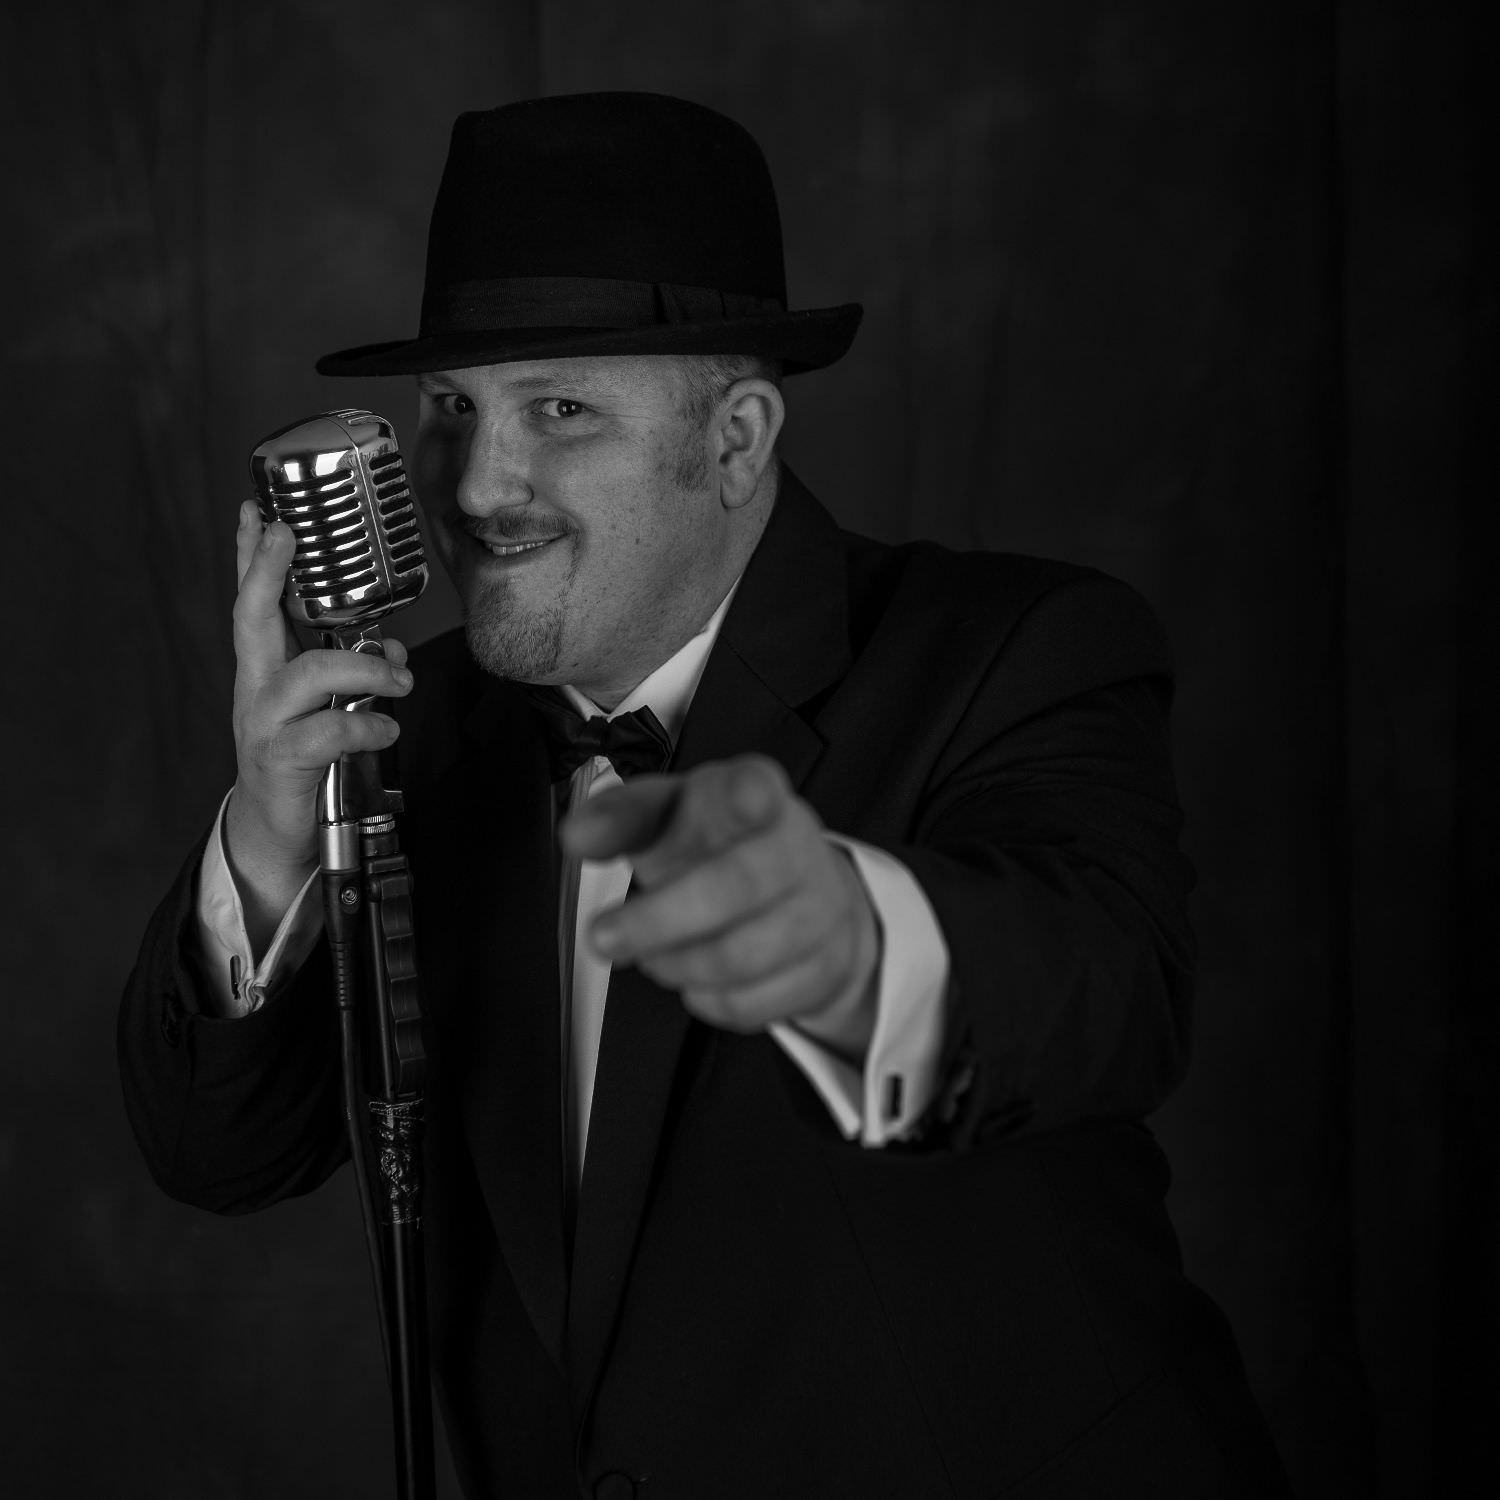 Jon paul swing singer points at camera while caressing back of vintage microphone on stand.